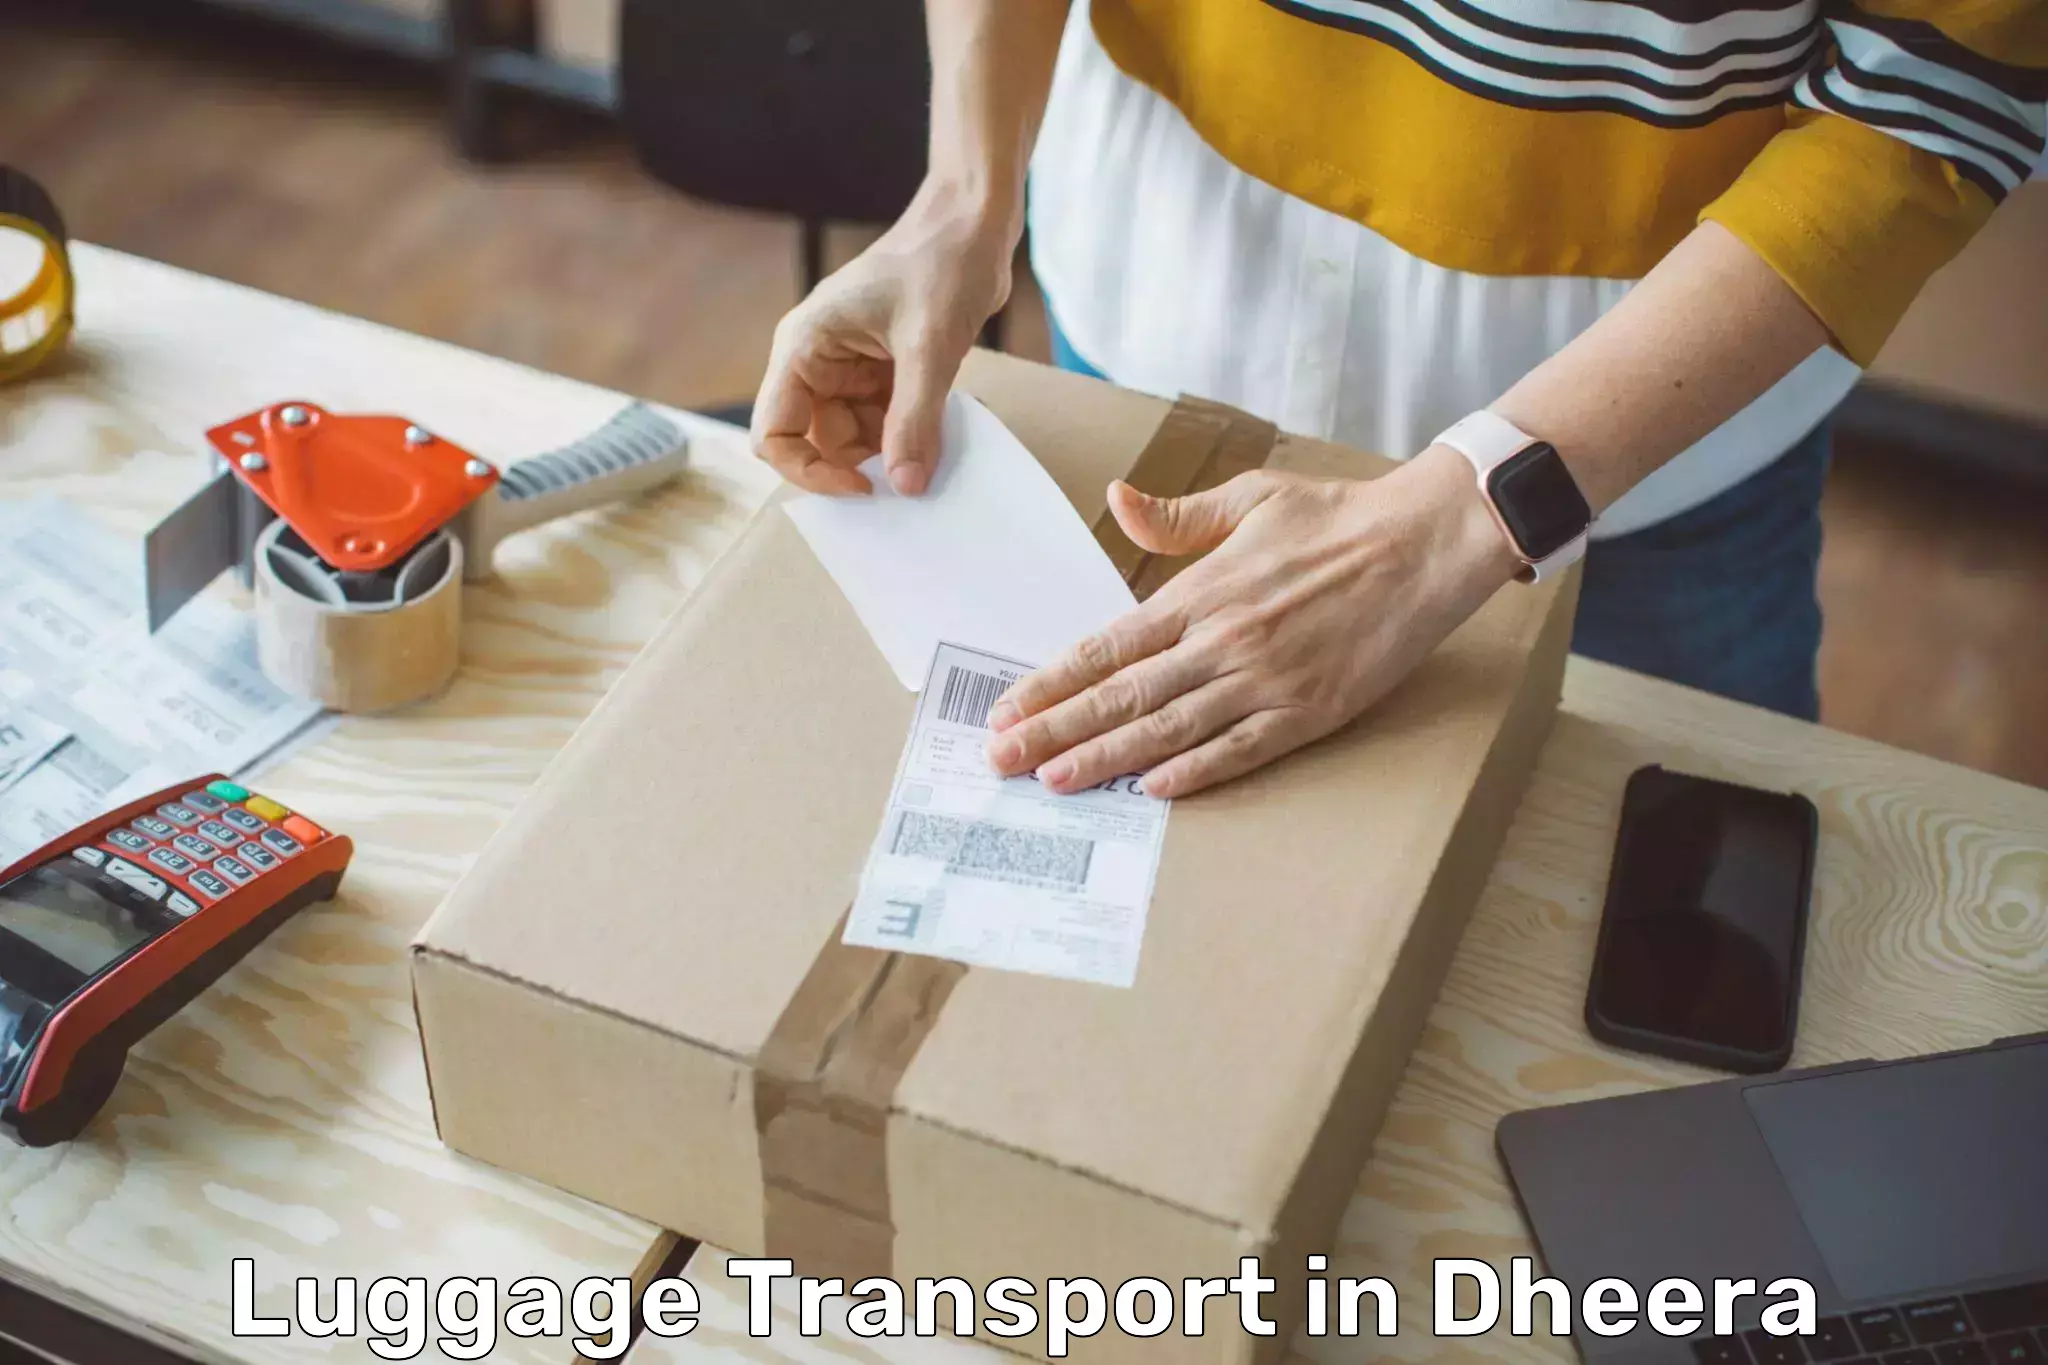 Baggage transport quote in Dheera